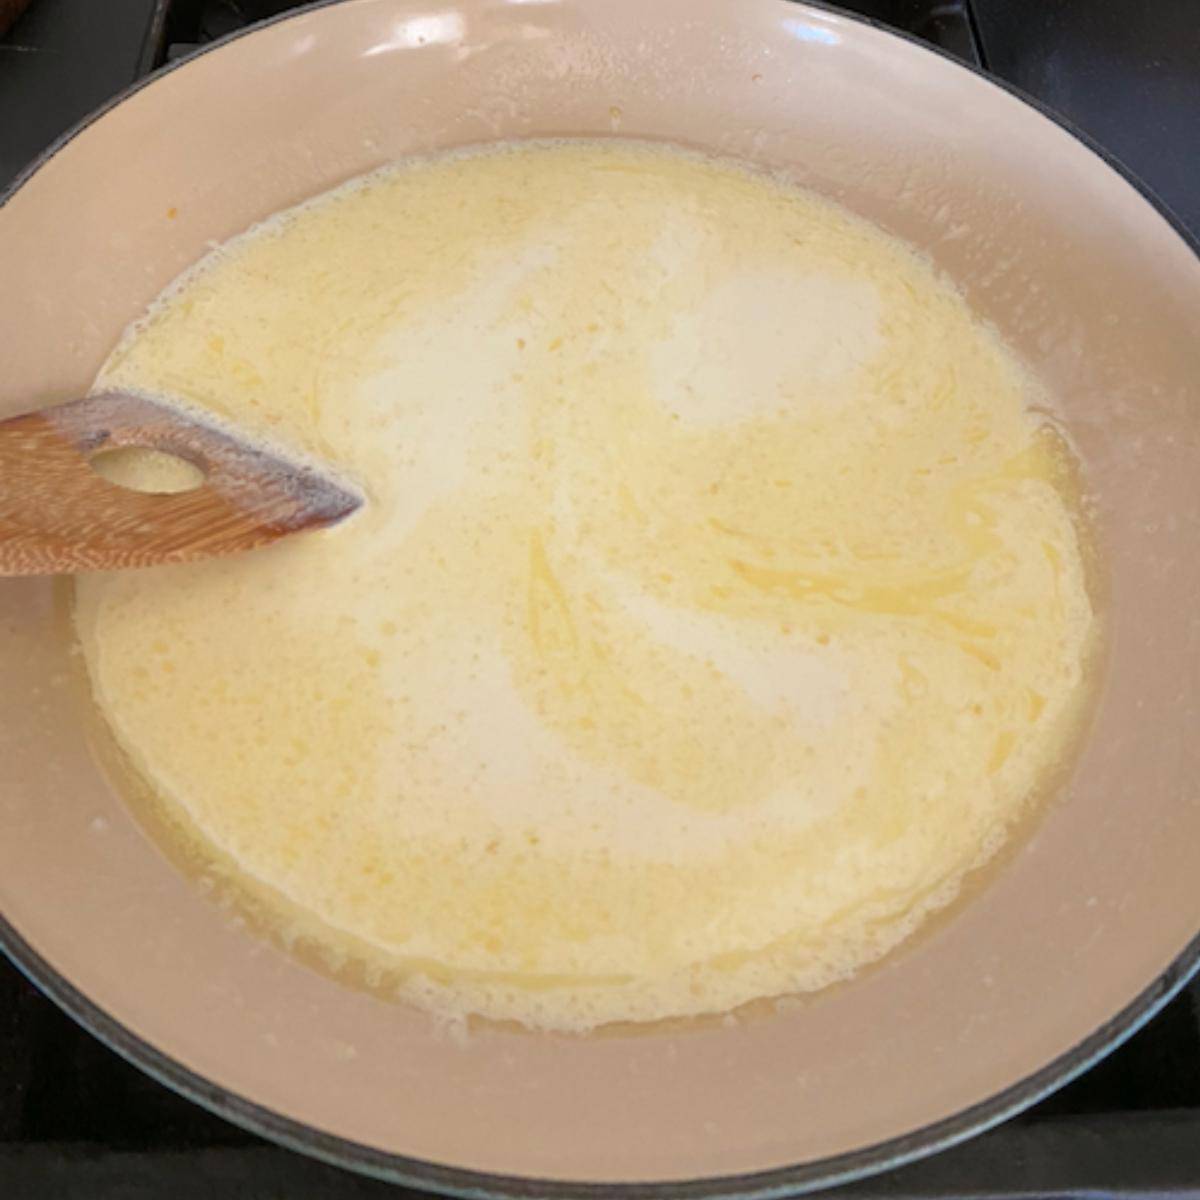 Cream and butter cooking in pan.